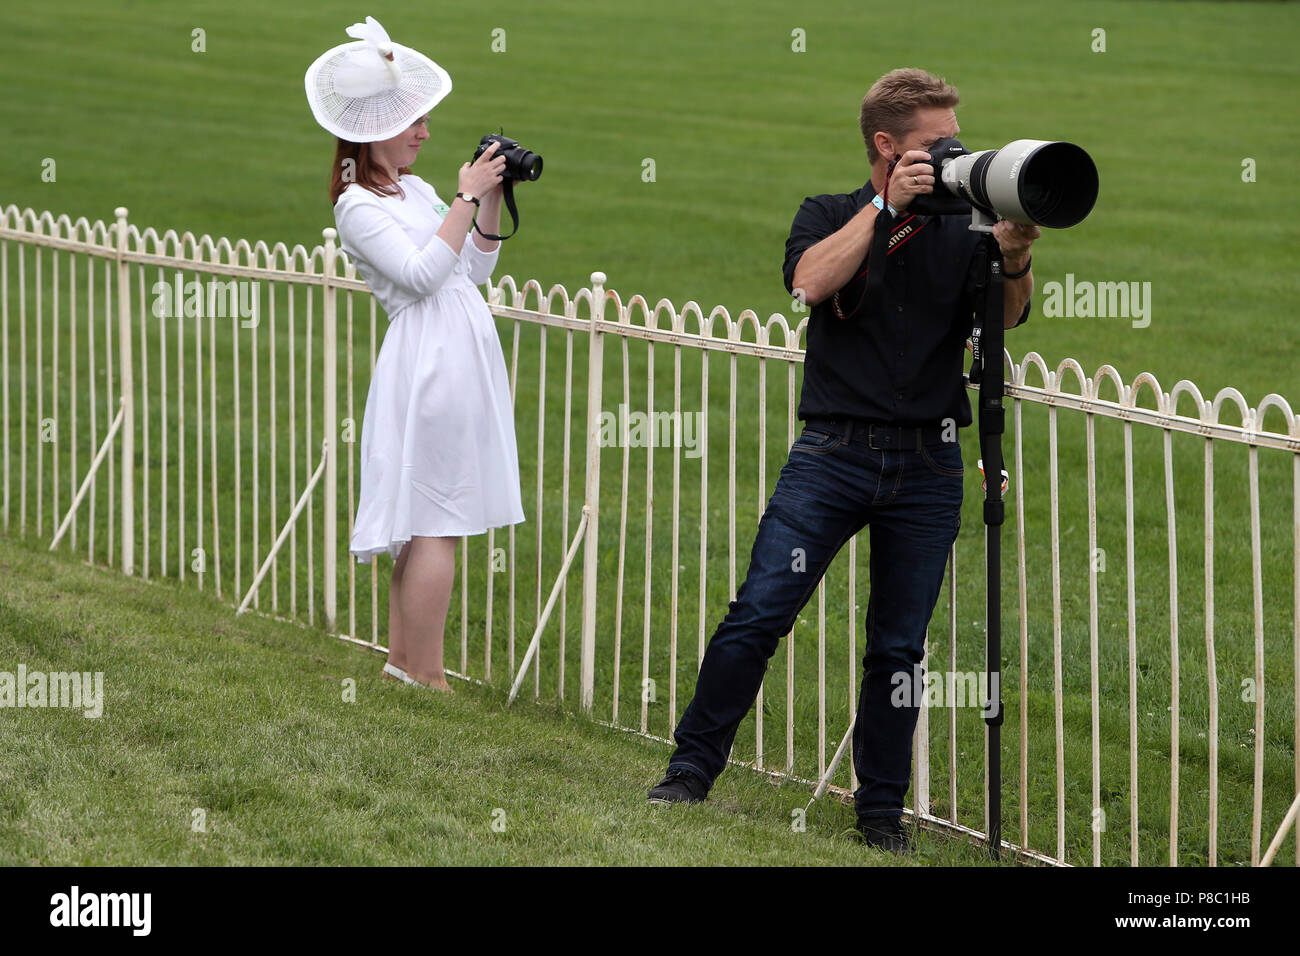 Hoppegarten, elegantly dressed woman with hat and press photographer taking pictures Stock Photo